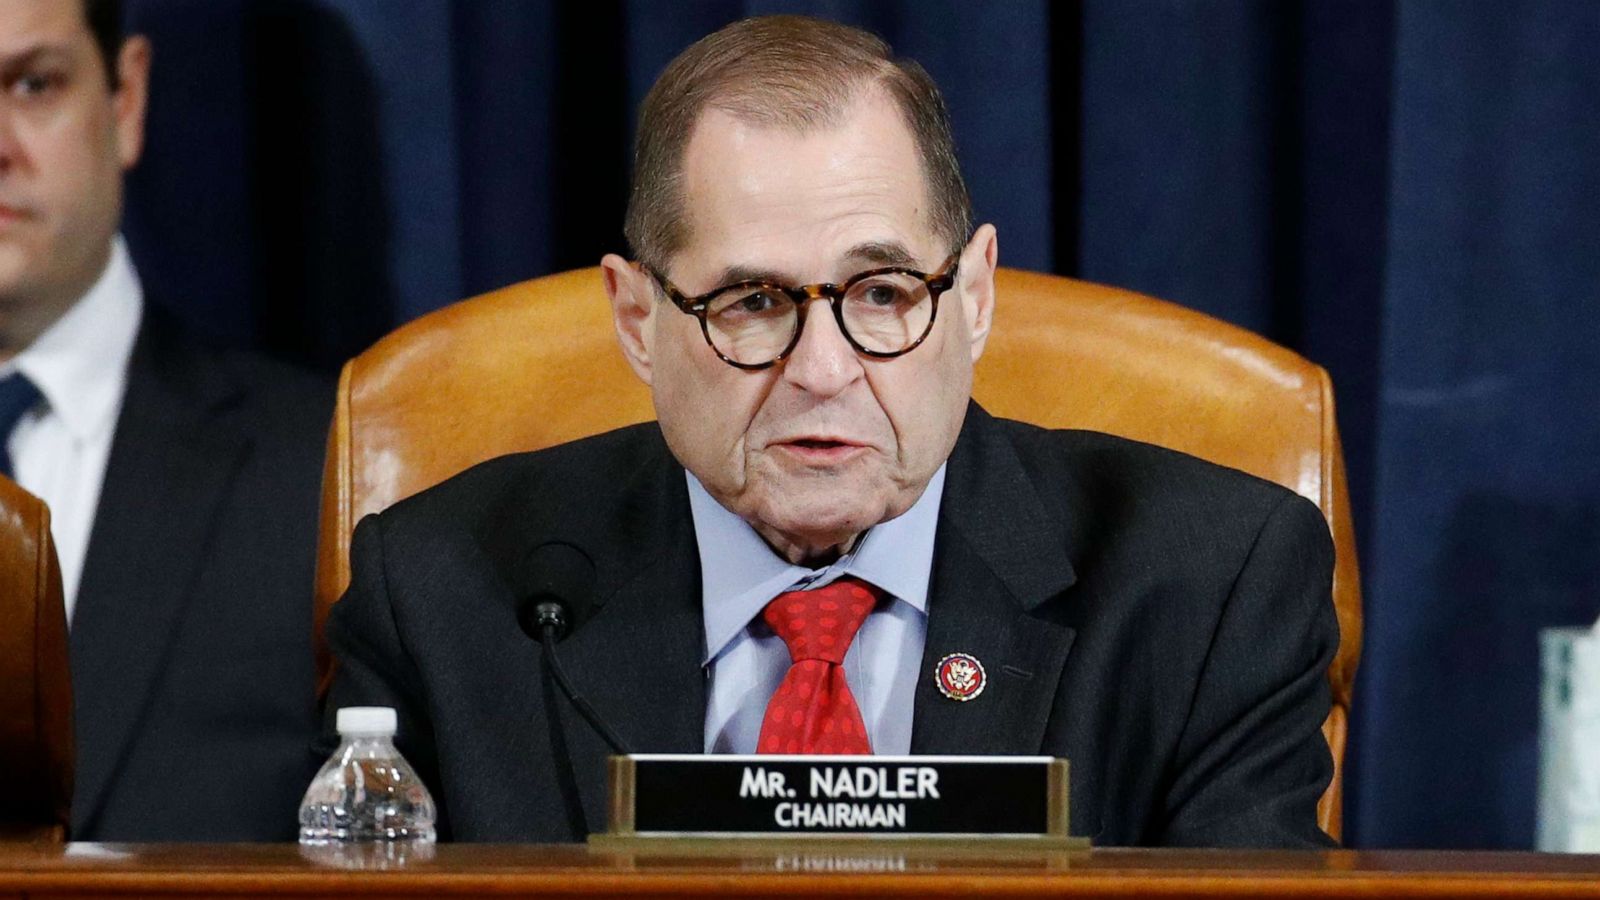 God’s will ‘Is No Concern Of This Congress,’ – Democrat Rep. Nadler (Video)